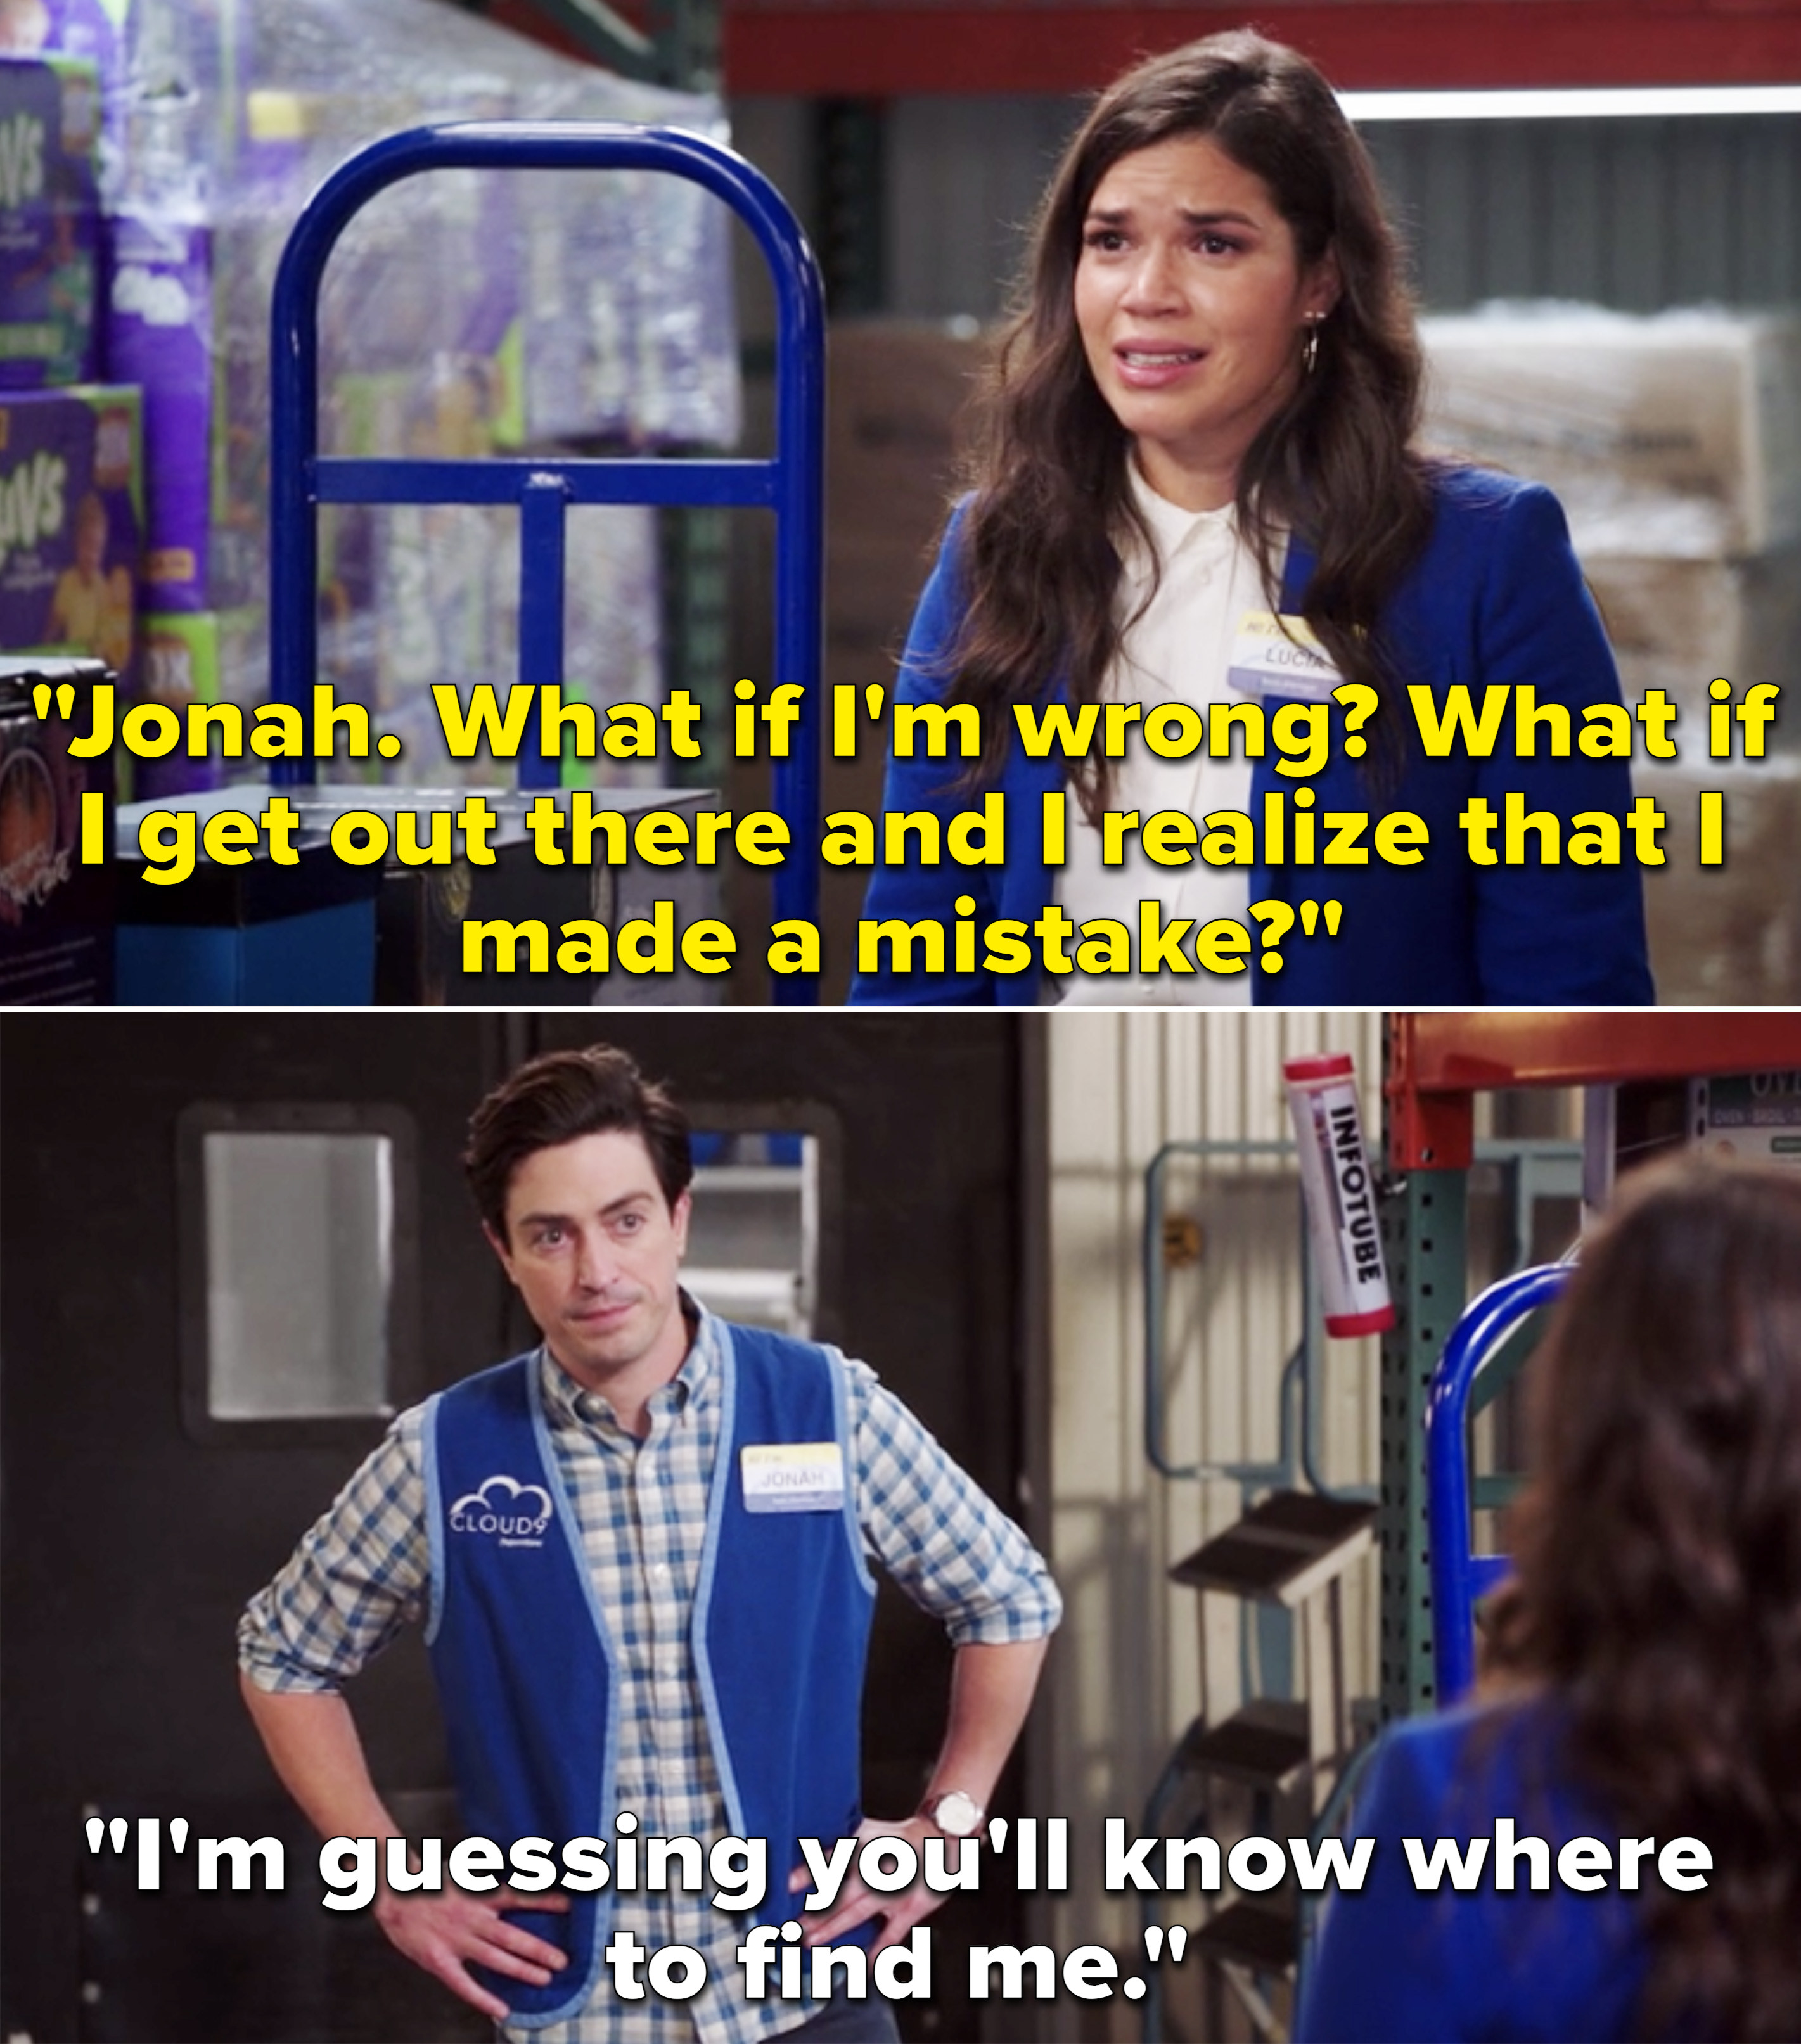 Amy telling Jonah, &quot;What if I&#x27;m wrong? What if I get out there and I realize that I made a mistake?&quot;